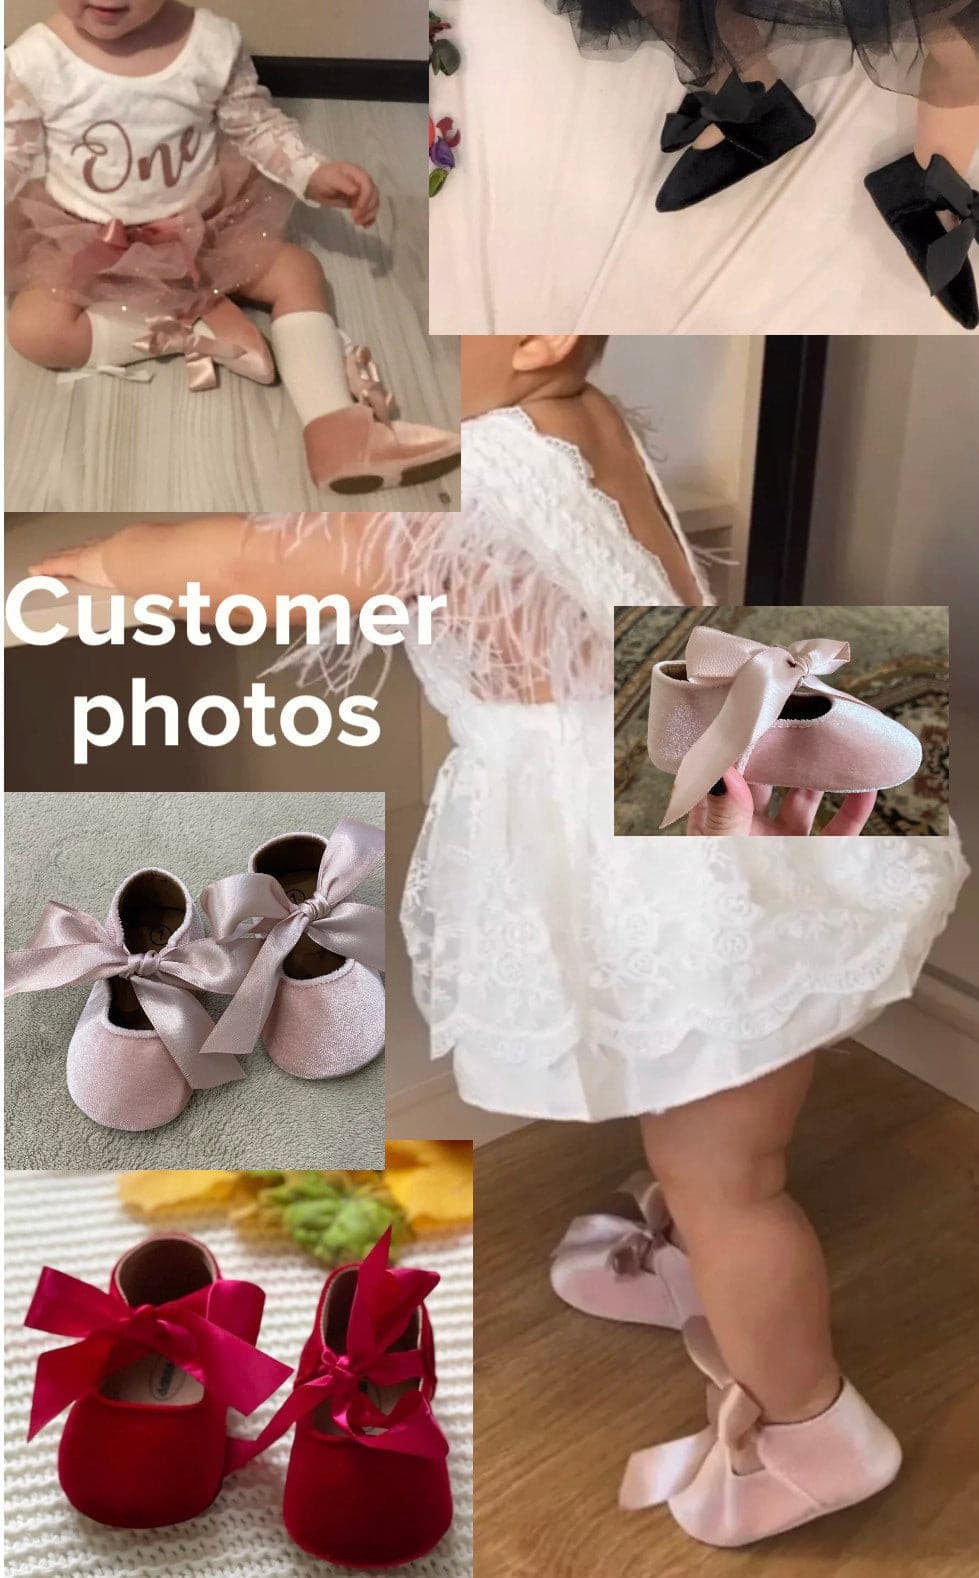 Velvet Baby Shoes, Giles Prewalker Shoes, Handmade Baby Shoes, Pink ba-
 Welcome! Thanks for looking in our shop and viewing these beautiful baby shoes.Our quality first walker shoes are durable, breathable &amp; super cute on baby’s fe-Bijou Bubs